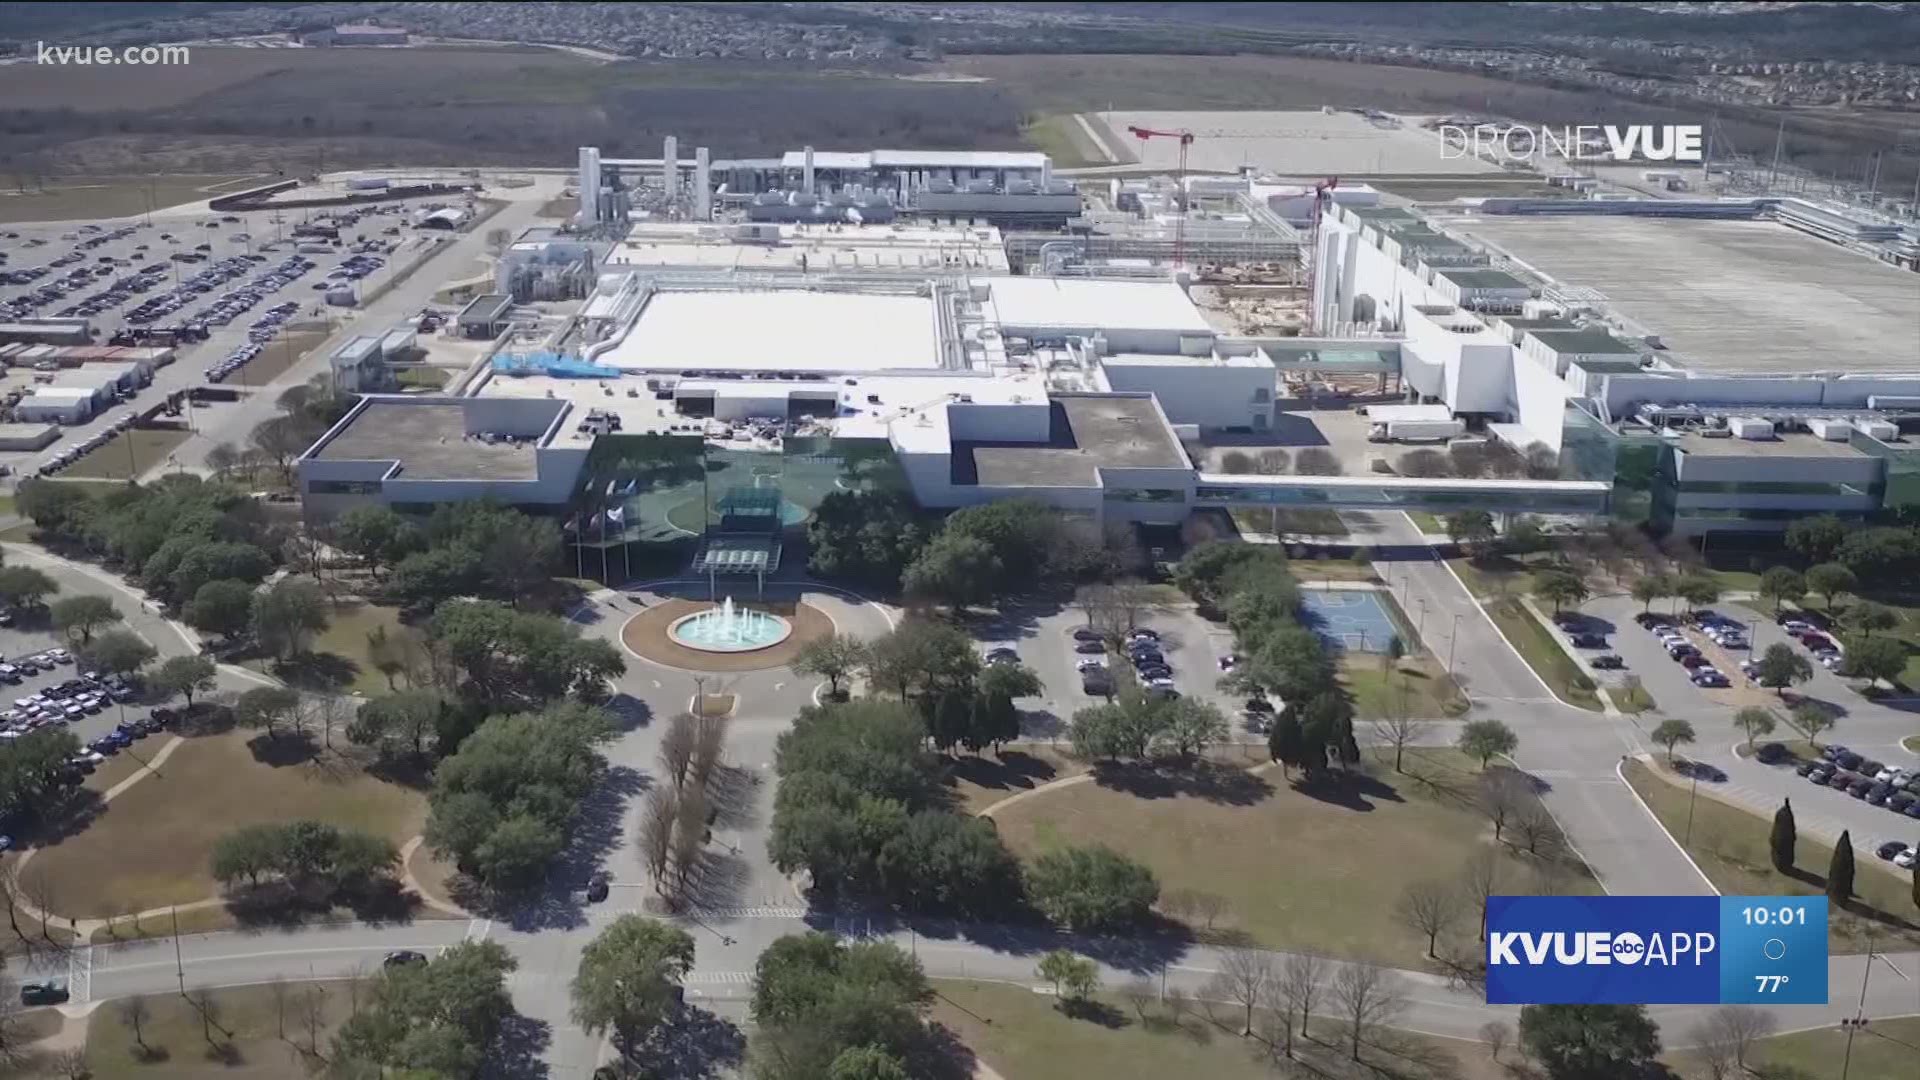 Samsung is also looking at locations in Arizona and New York, but a site analyst believes Texas has the best business climate for the factory.